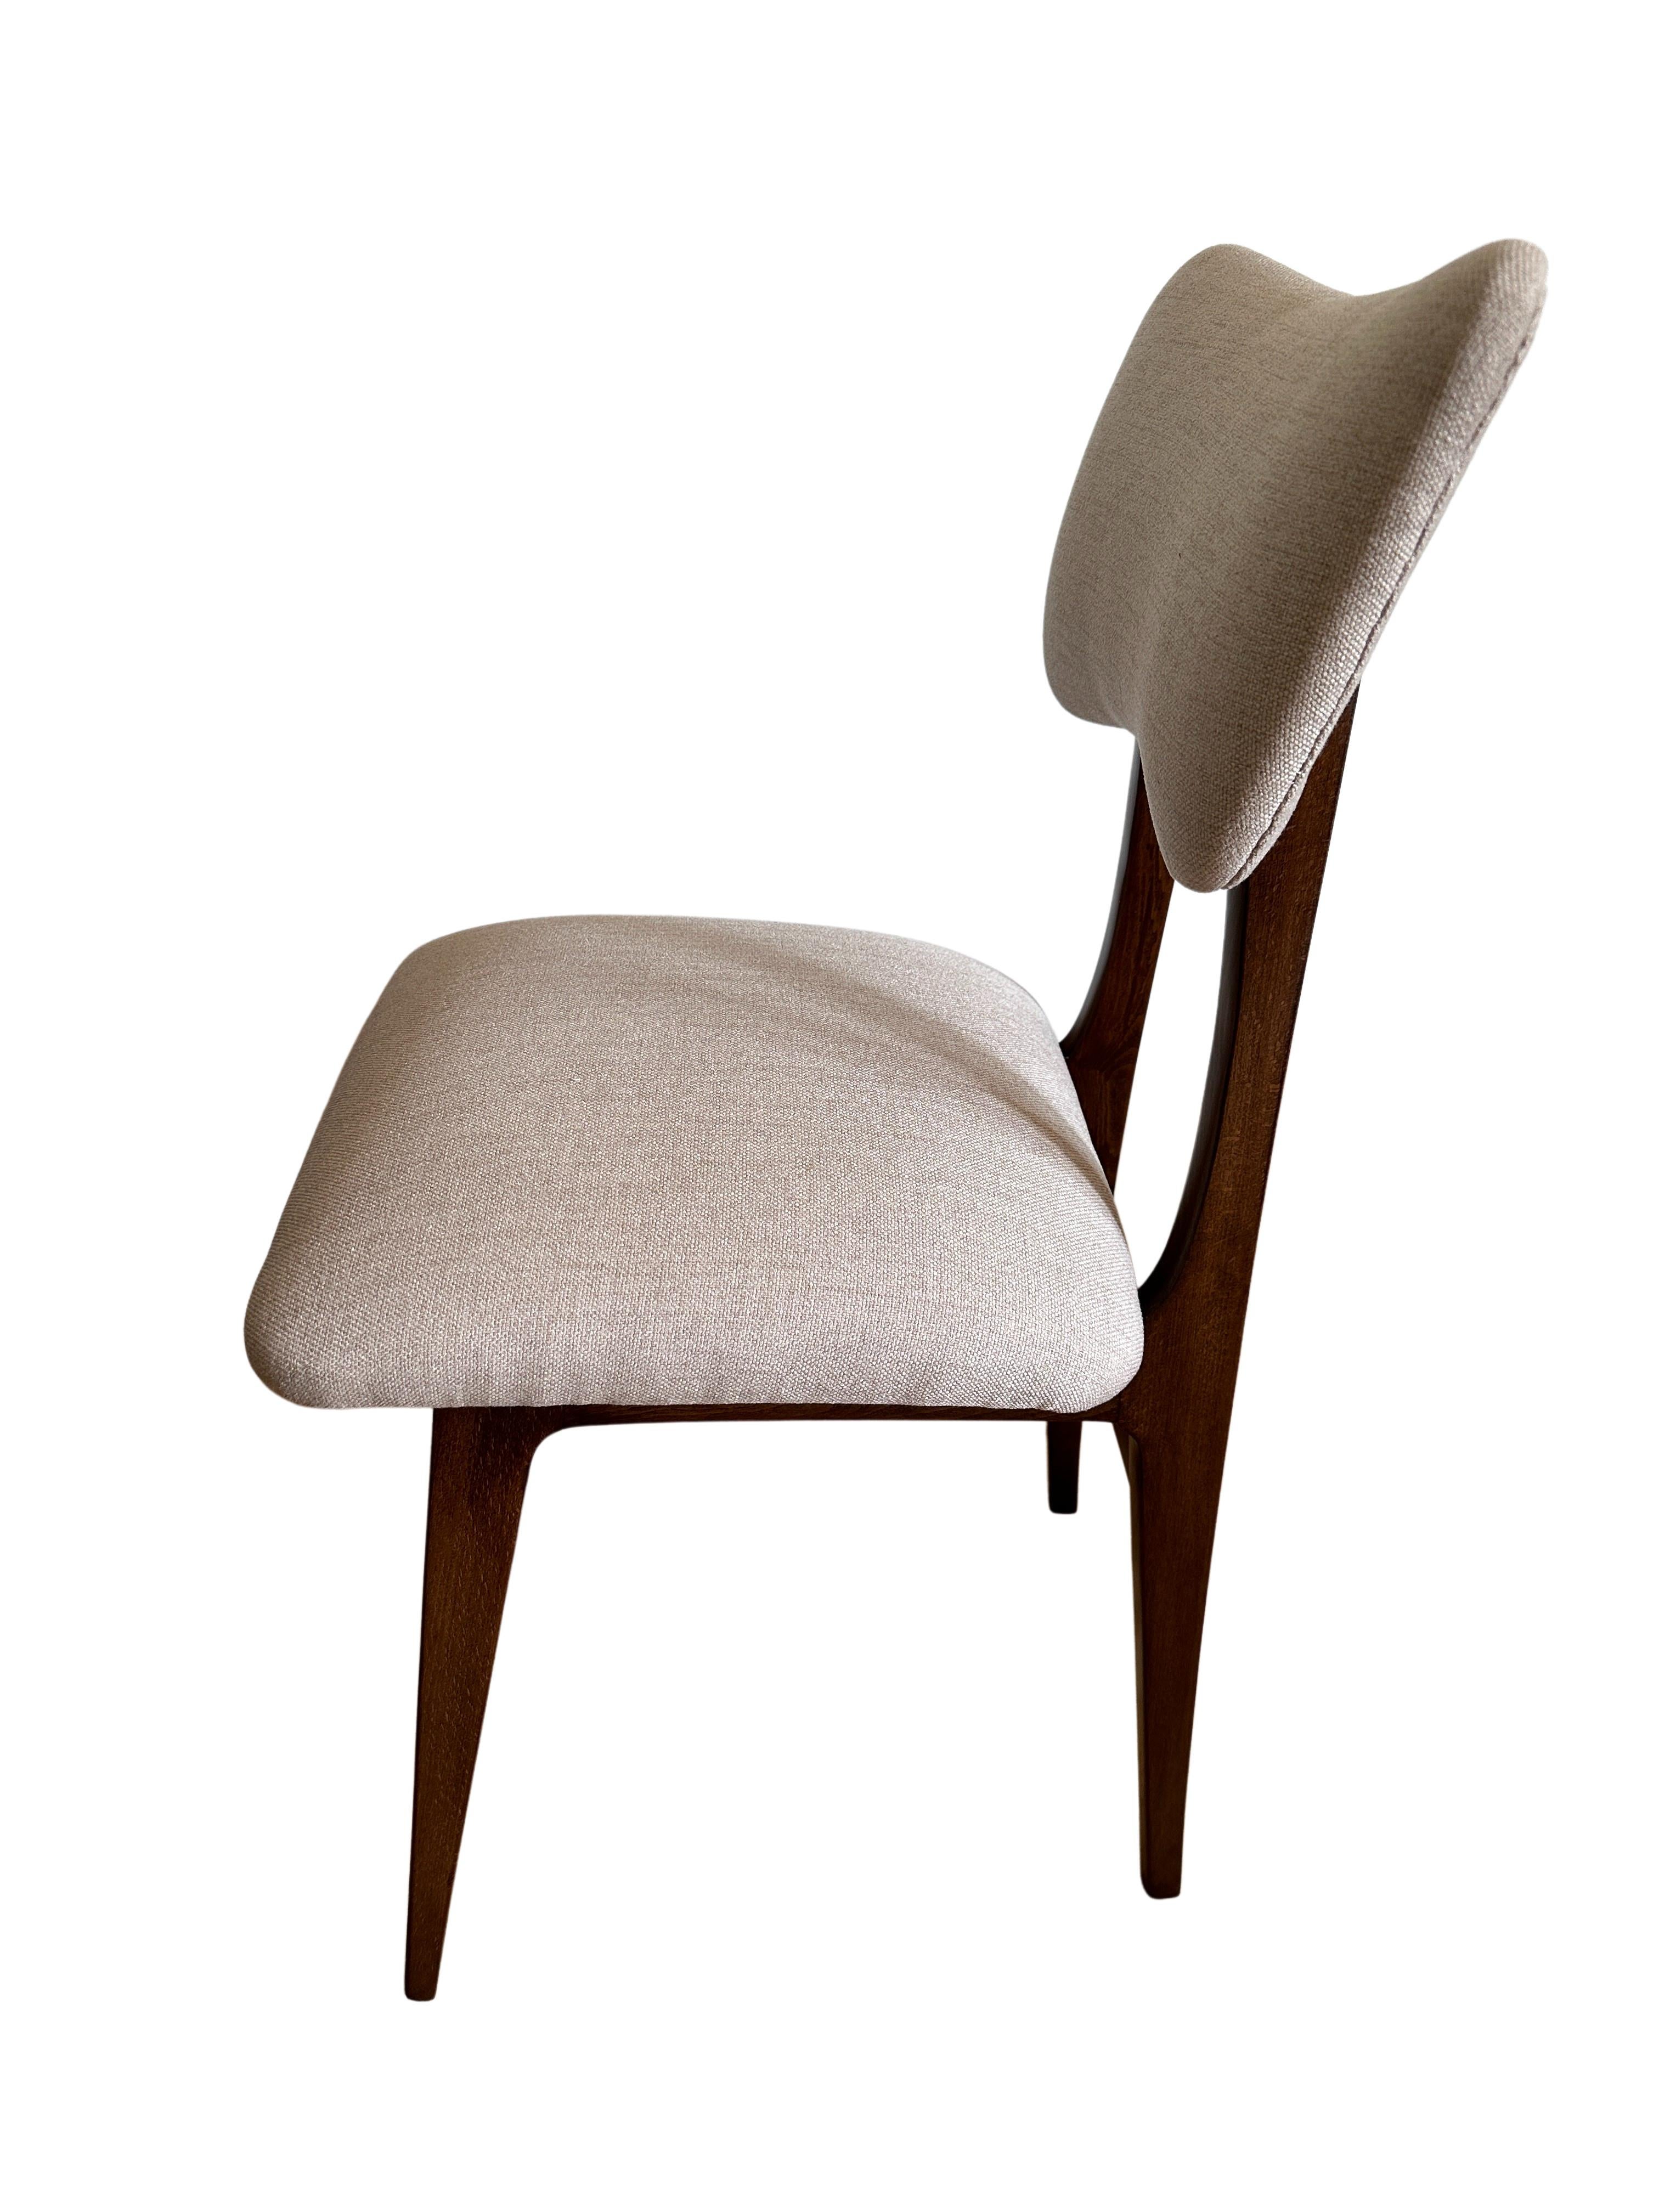 20th Century Set of 6 Midcentury Beige Dining Chairs, Europe, 1960s For Sale